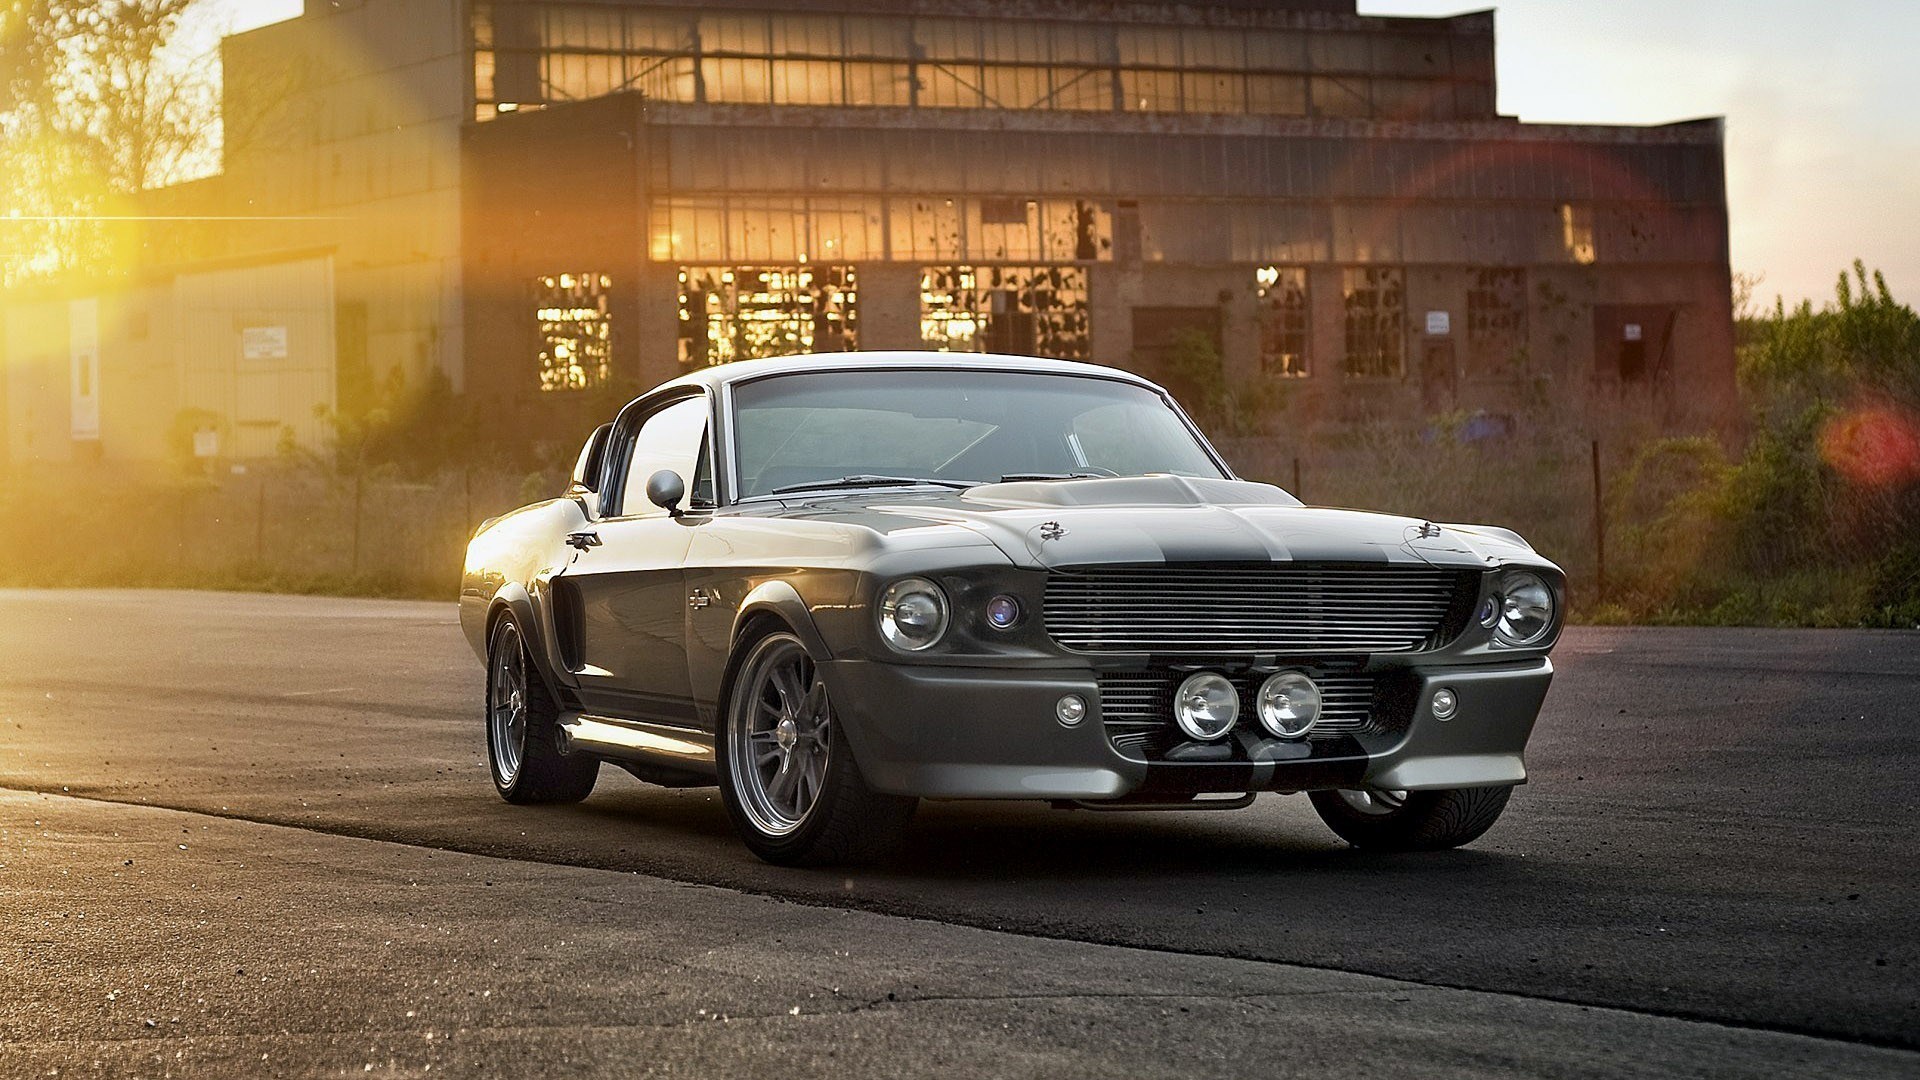 Ford Shelby Gt500 Eleanor Muscle Car Photo HD Wallpaper